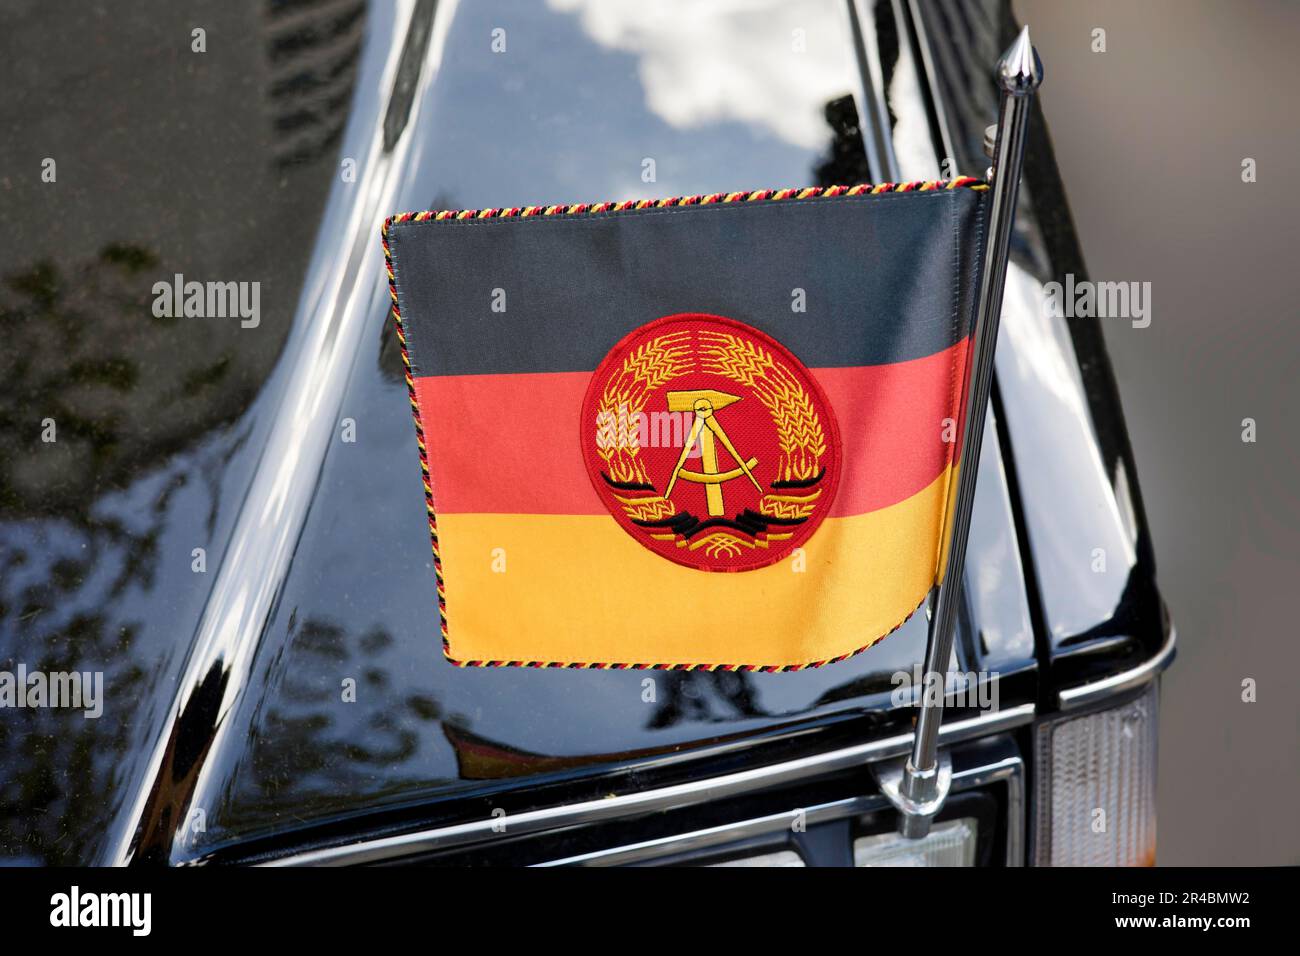 National flag of the GDR on a state coach Volvo 264 TE, Classic Days, Berlin, Germany Stock Photo